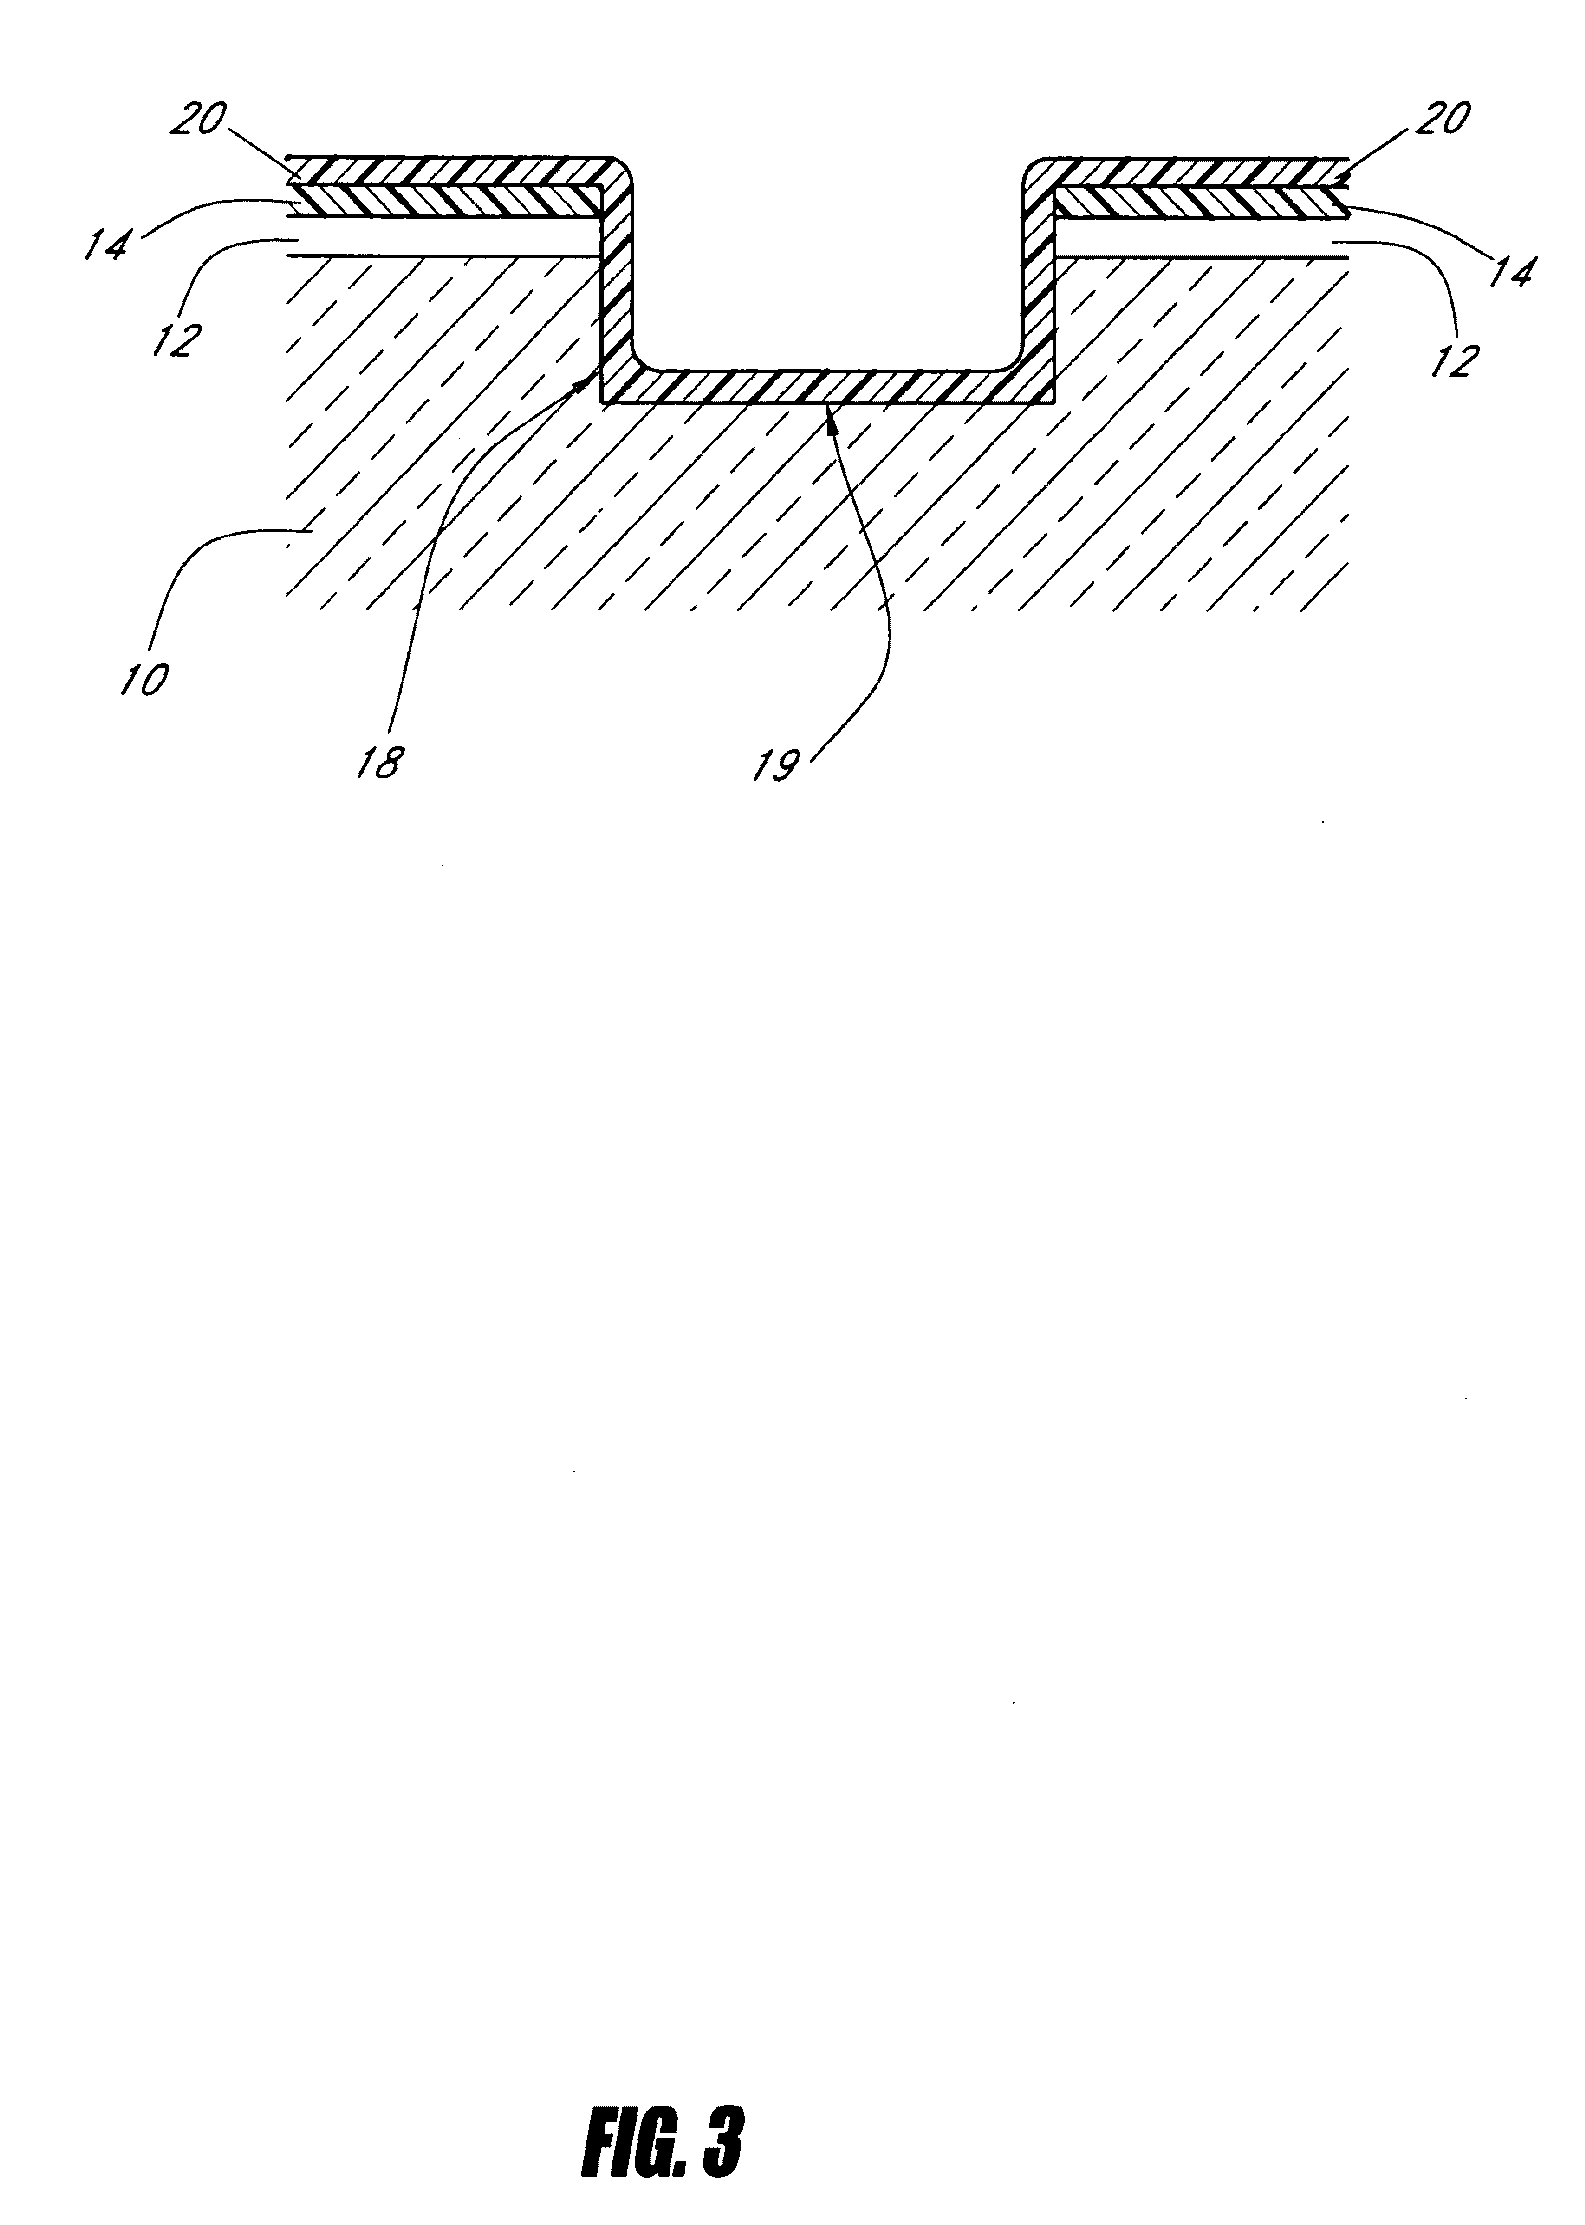 Trench insulation structures and methods